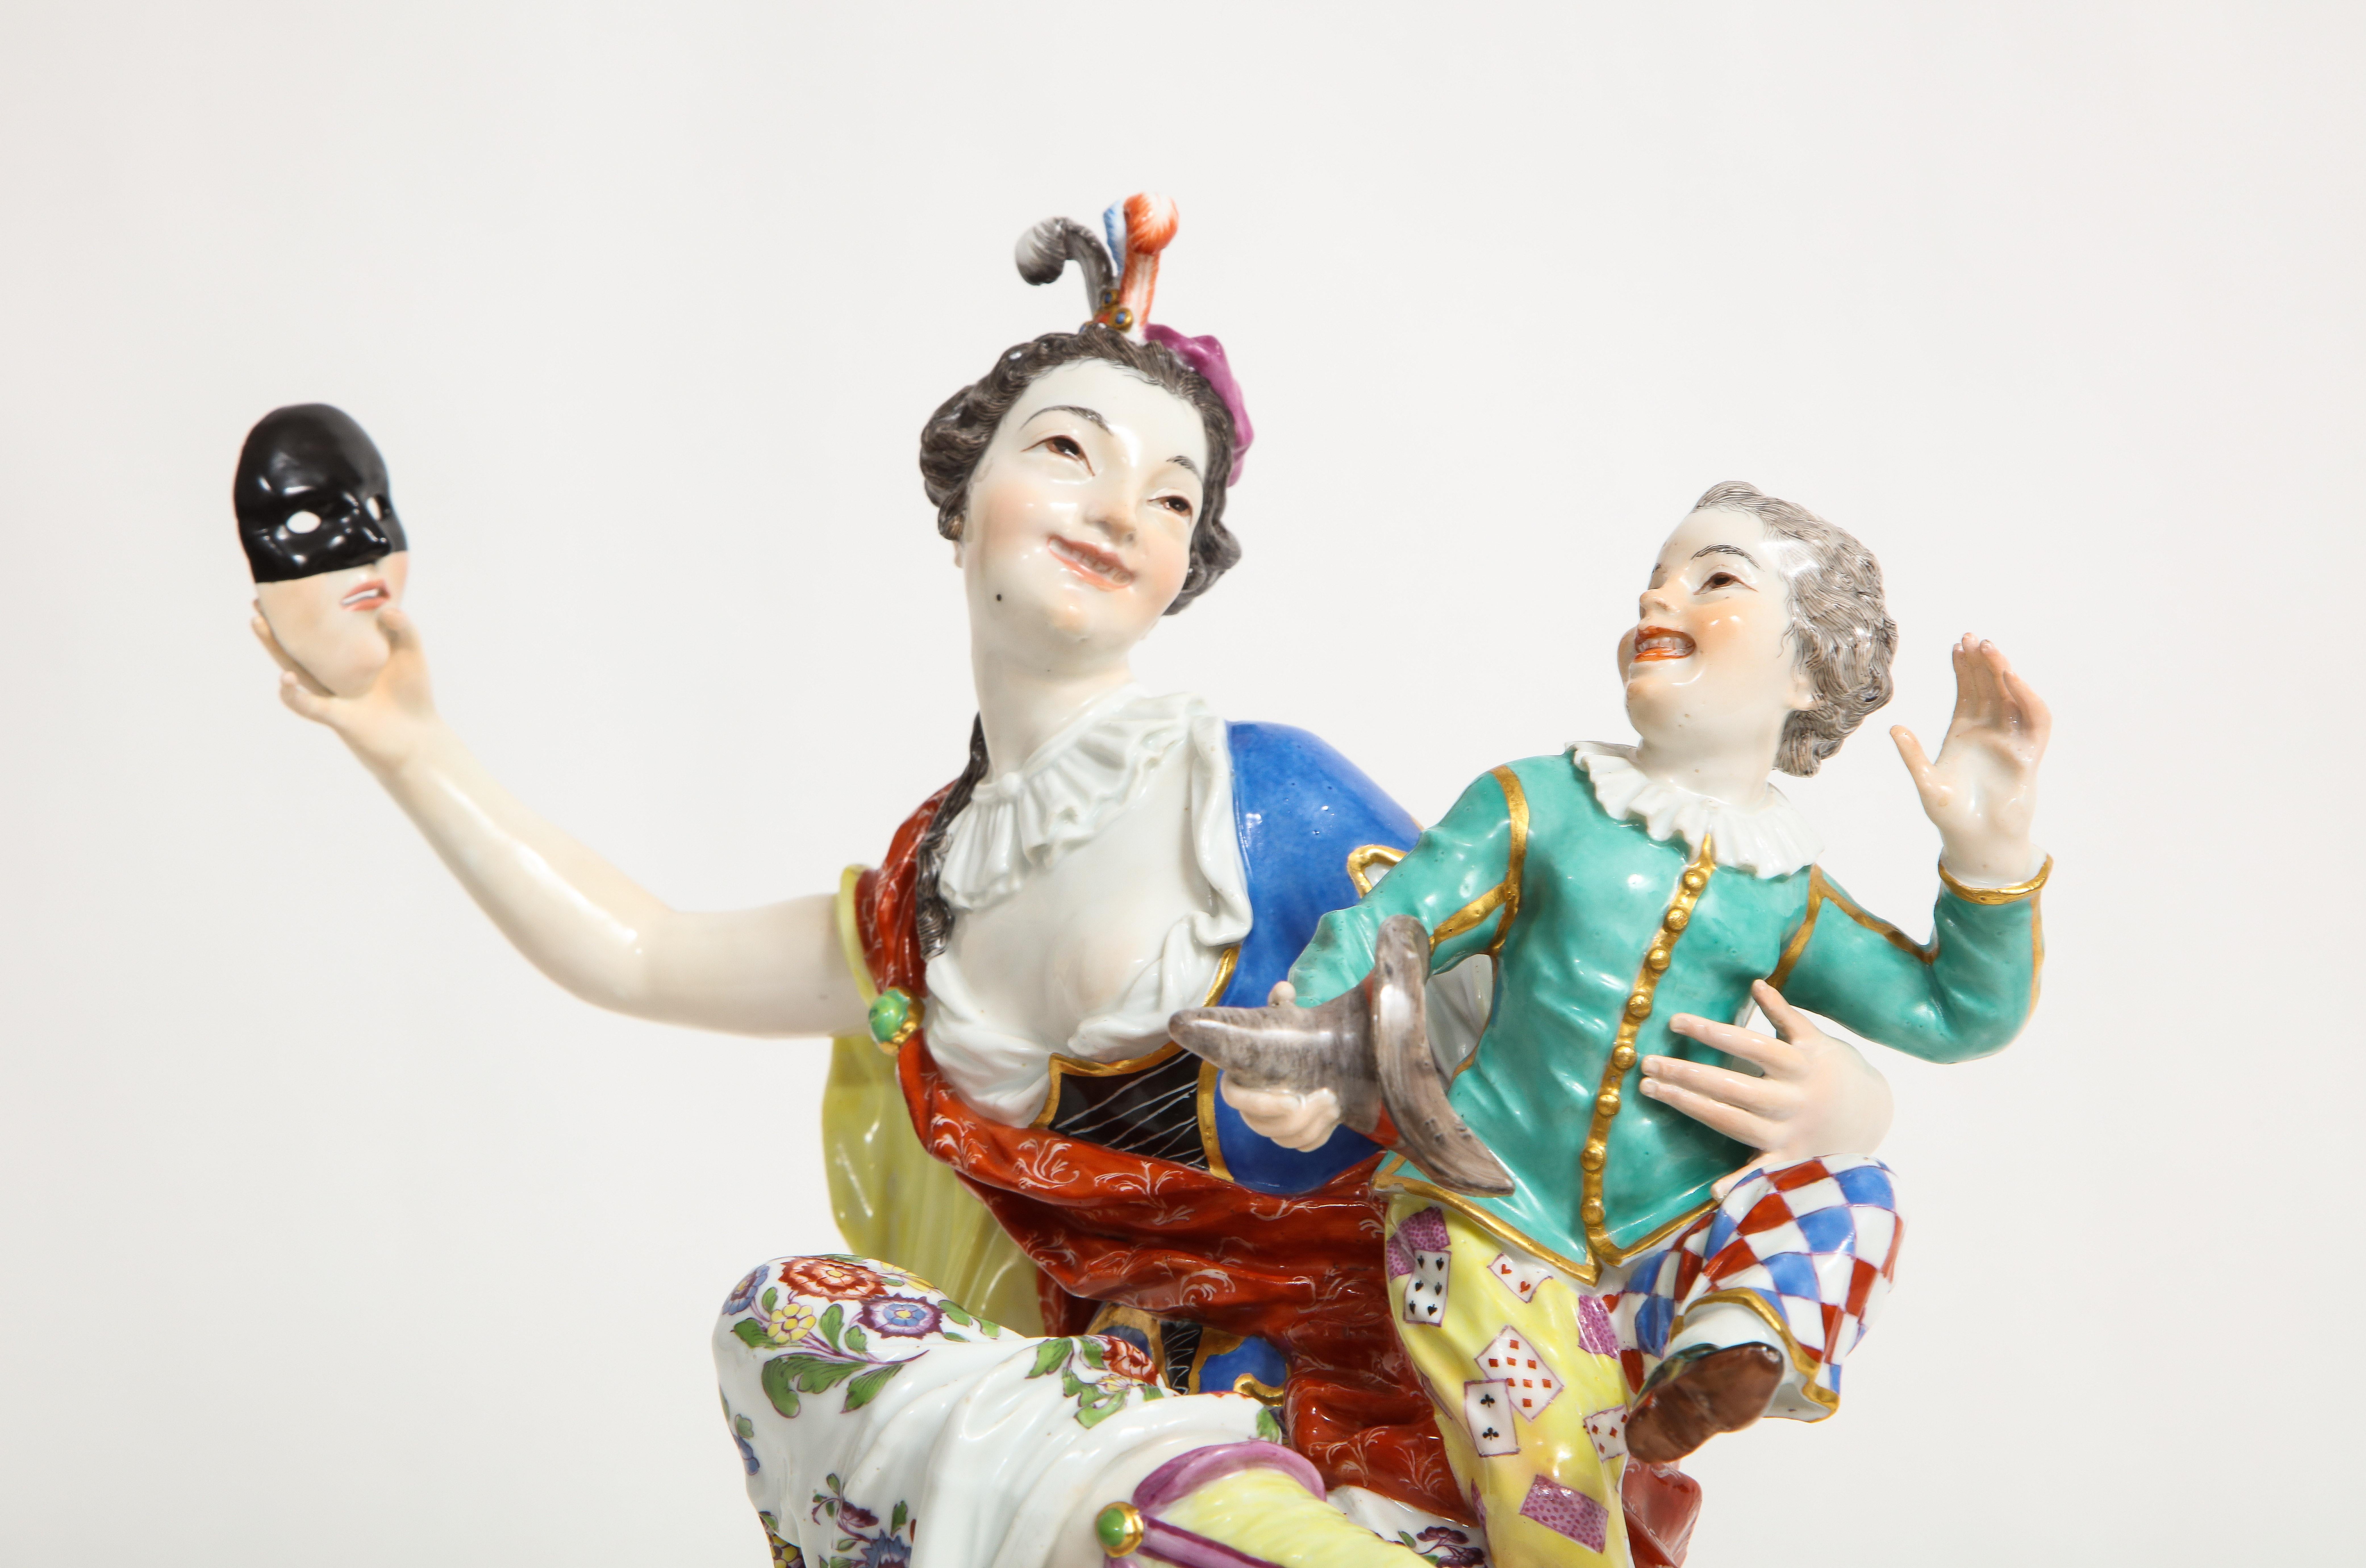 Rare 18th Century Meissen Porcelain Group of a Thalia with a Harlequin Child For Sale 2